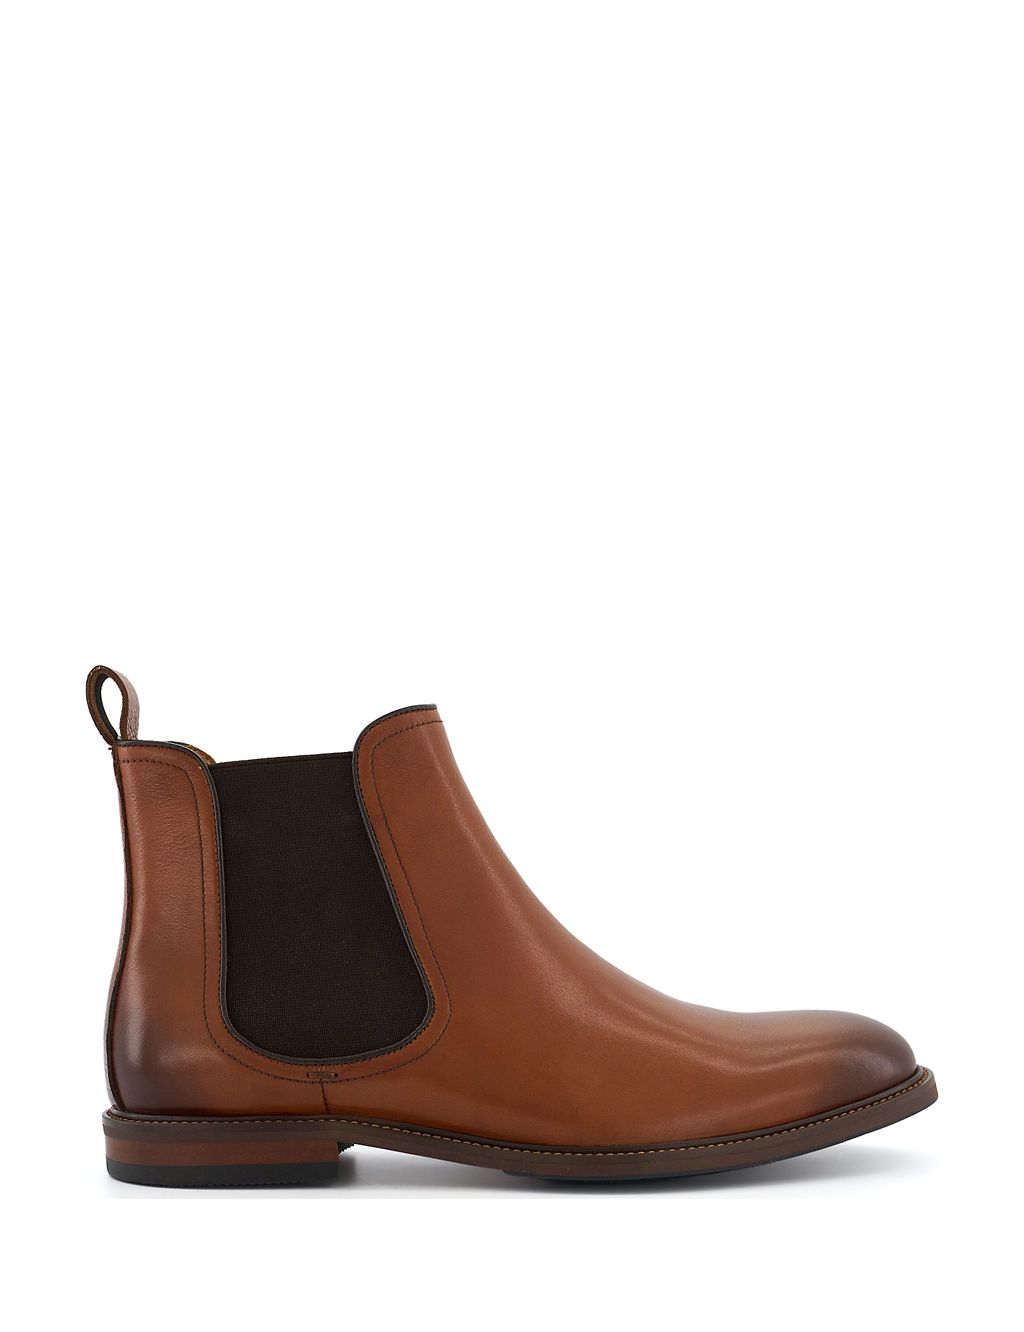 Leather Chelsea Boots | Dune London | M&S